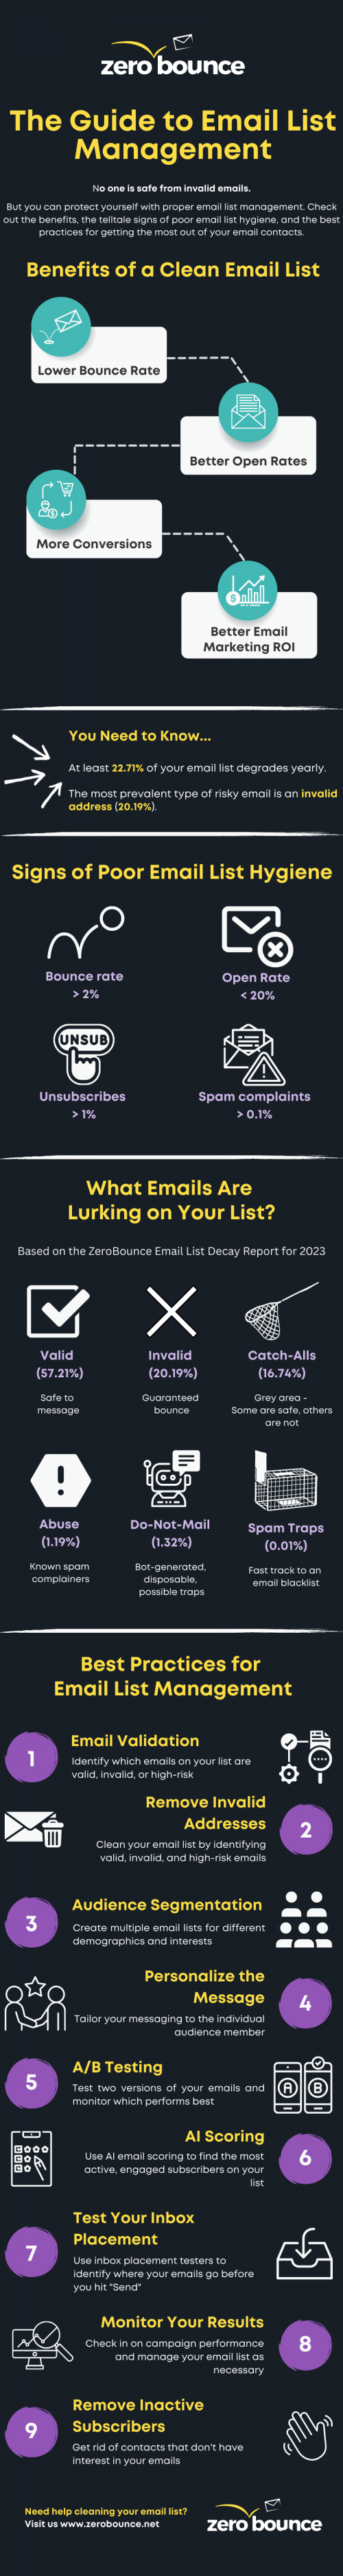 The-Guide-to-Email-List-Management.png